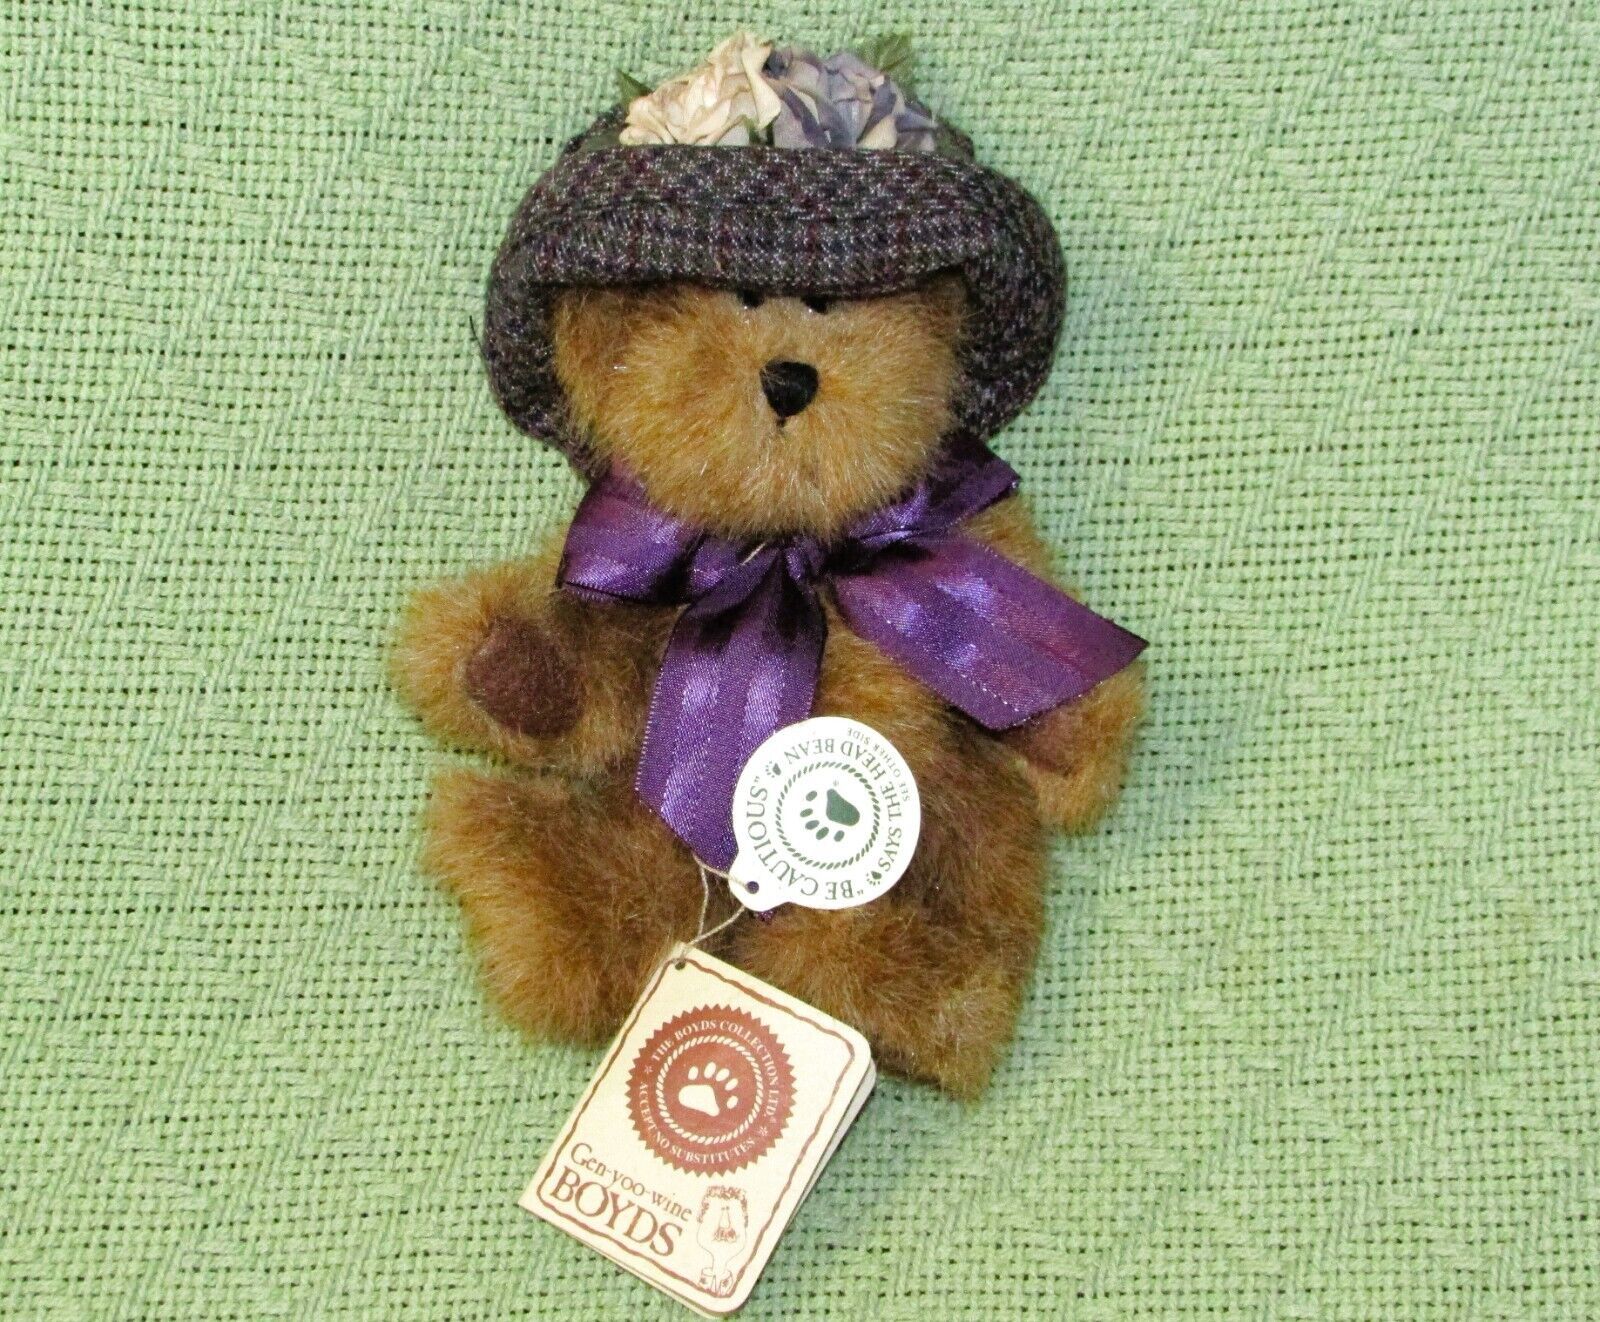 BOYDS BEARS CHRISTIANA LaBEARSLEY TEDDY 2001 8" VINTAGE WITH HAT & HANG TAGS - $10.80